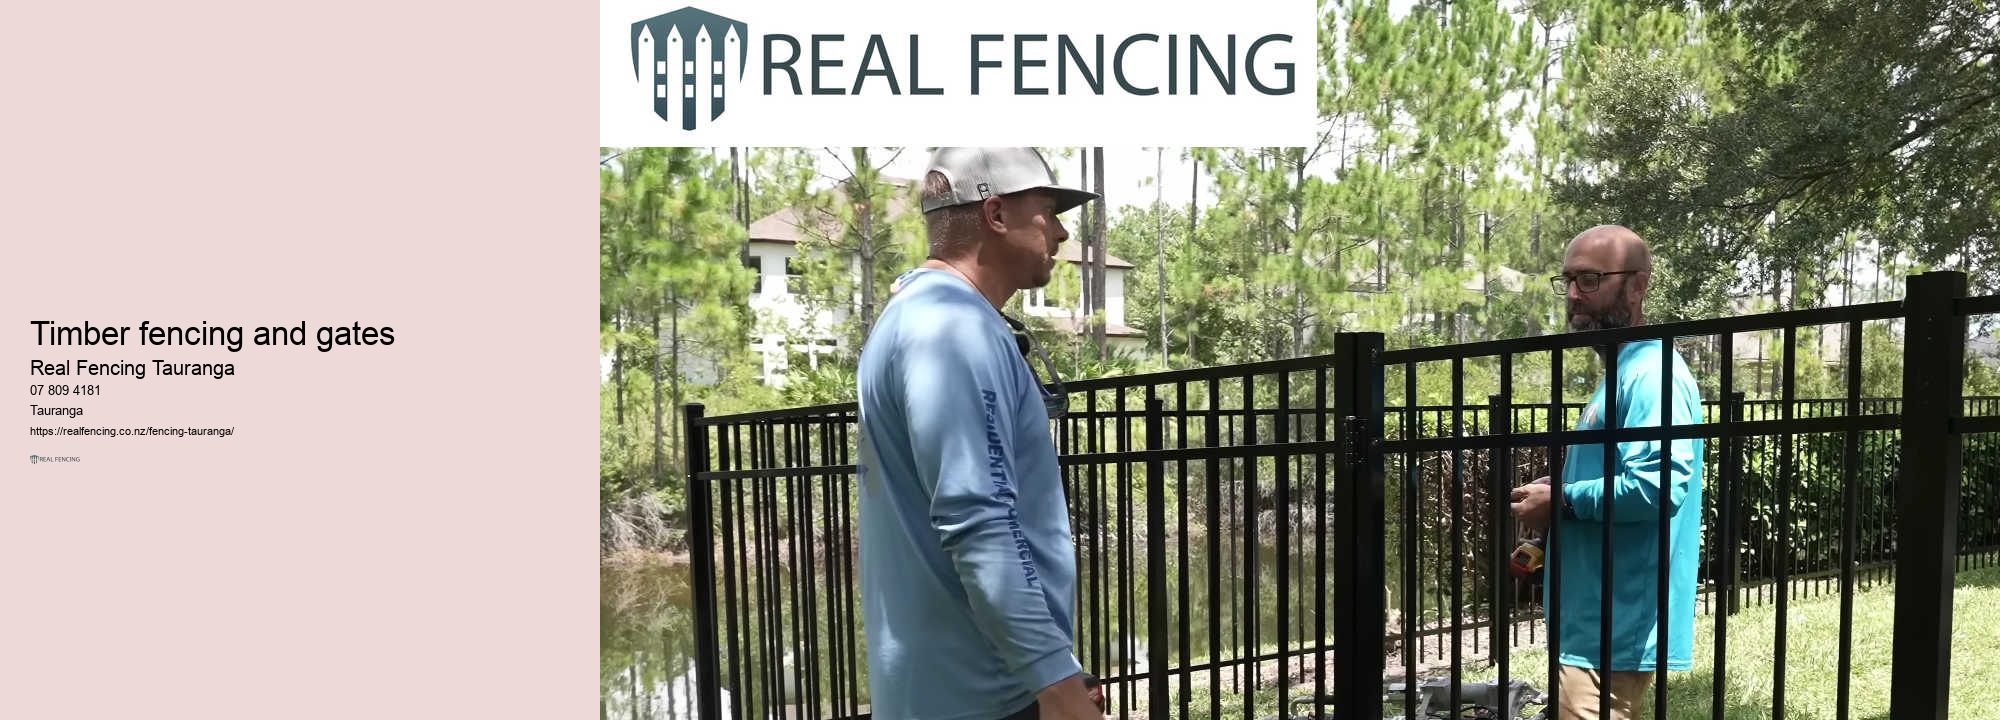 Fence and contractor